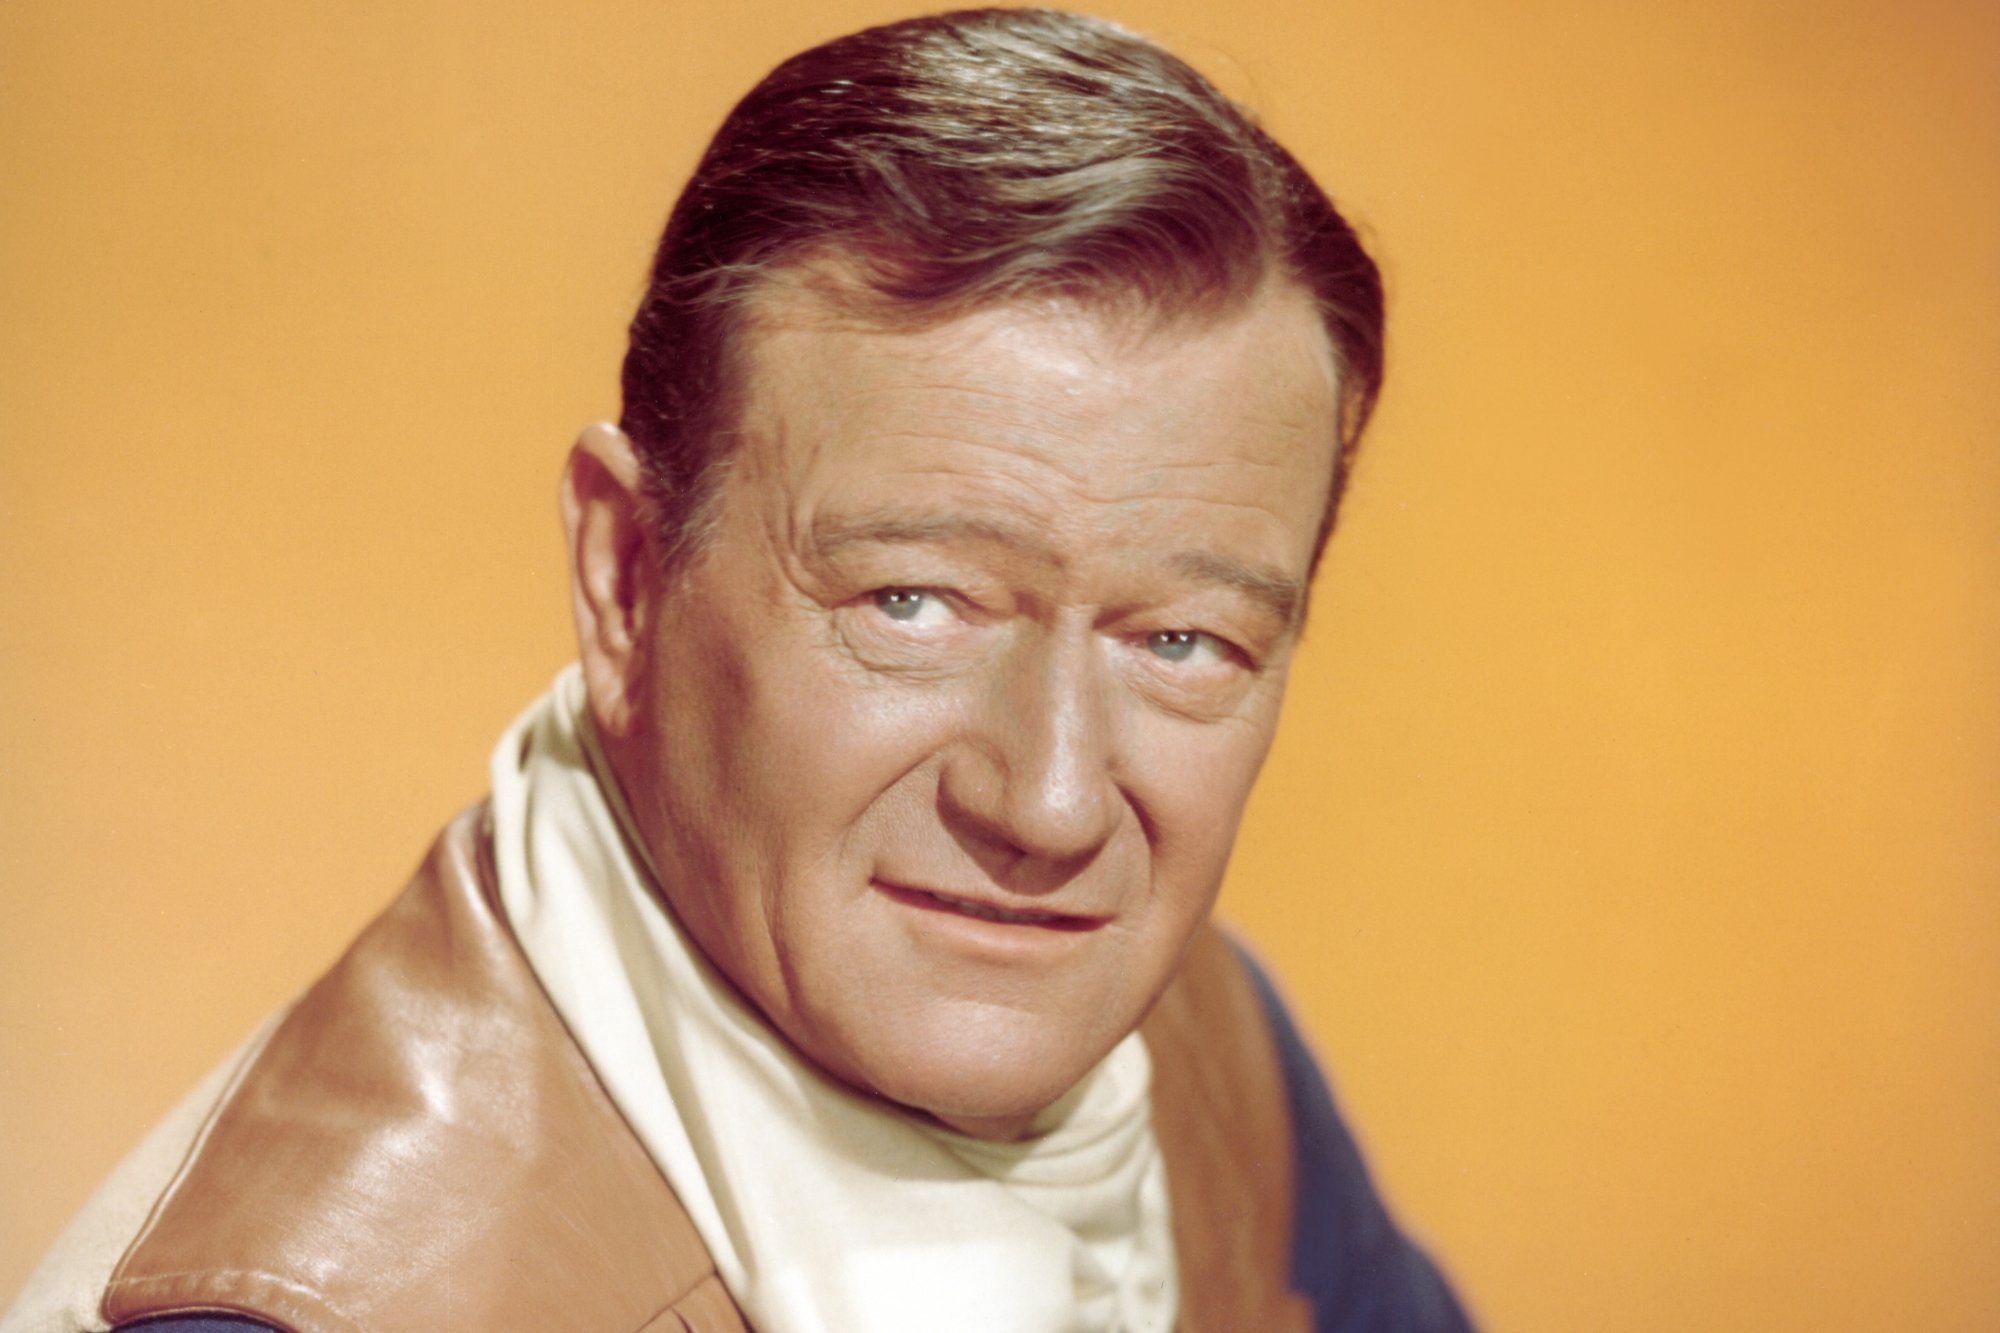 'El Dorado' actor John Wayne in a promo photo with a Western costume in front of a yellow background